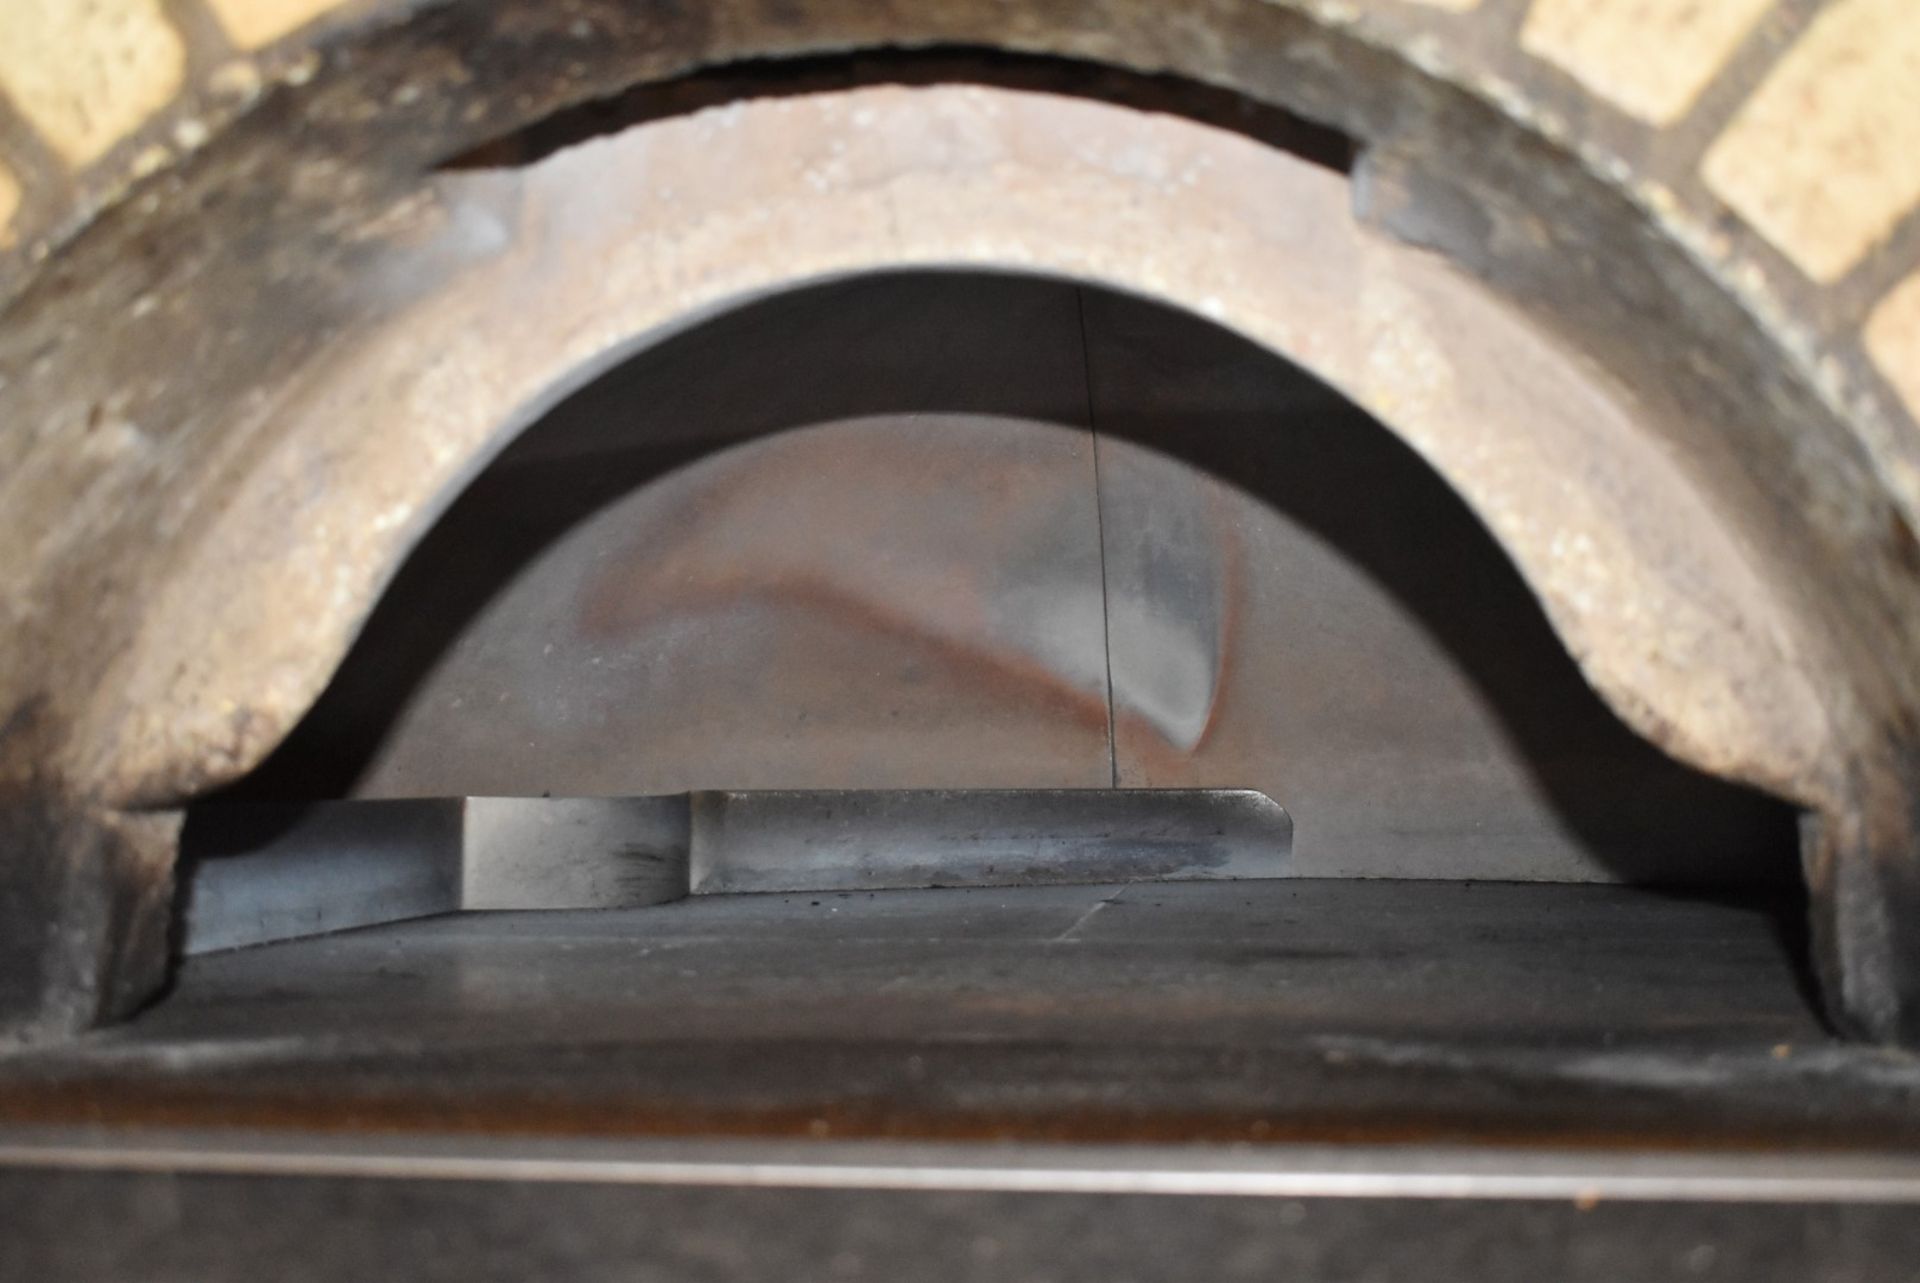 1 x MAM Firedome Commercial Stone Baked Gas Pizza Oven - Made in Italy - Image 9 of 16